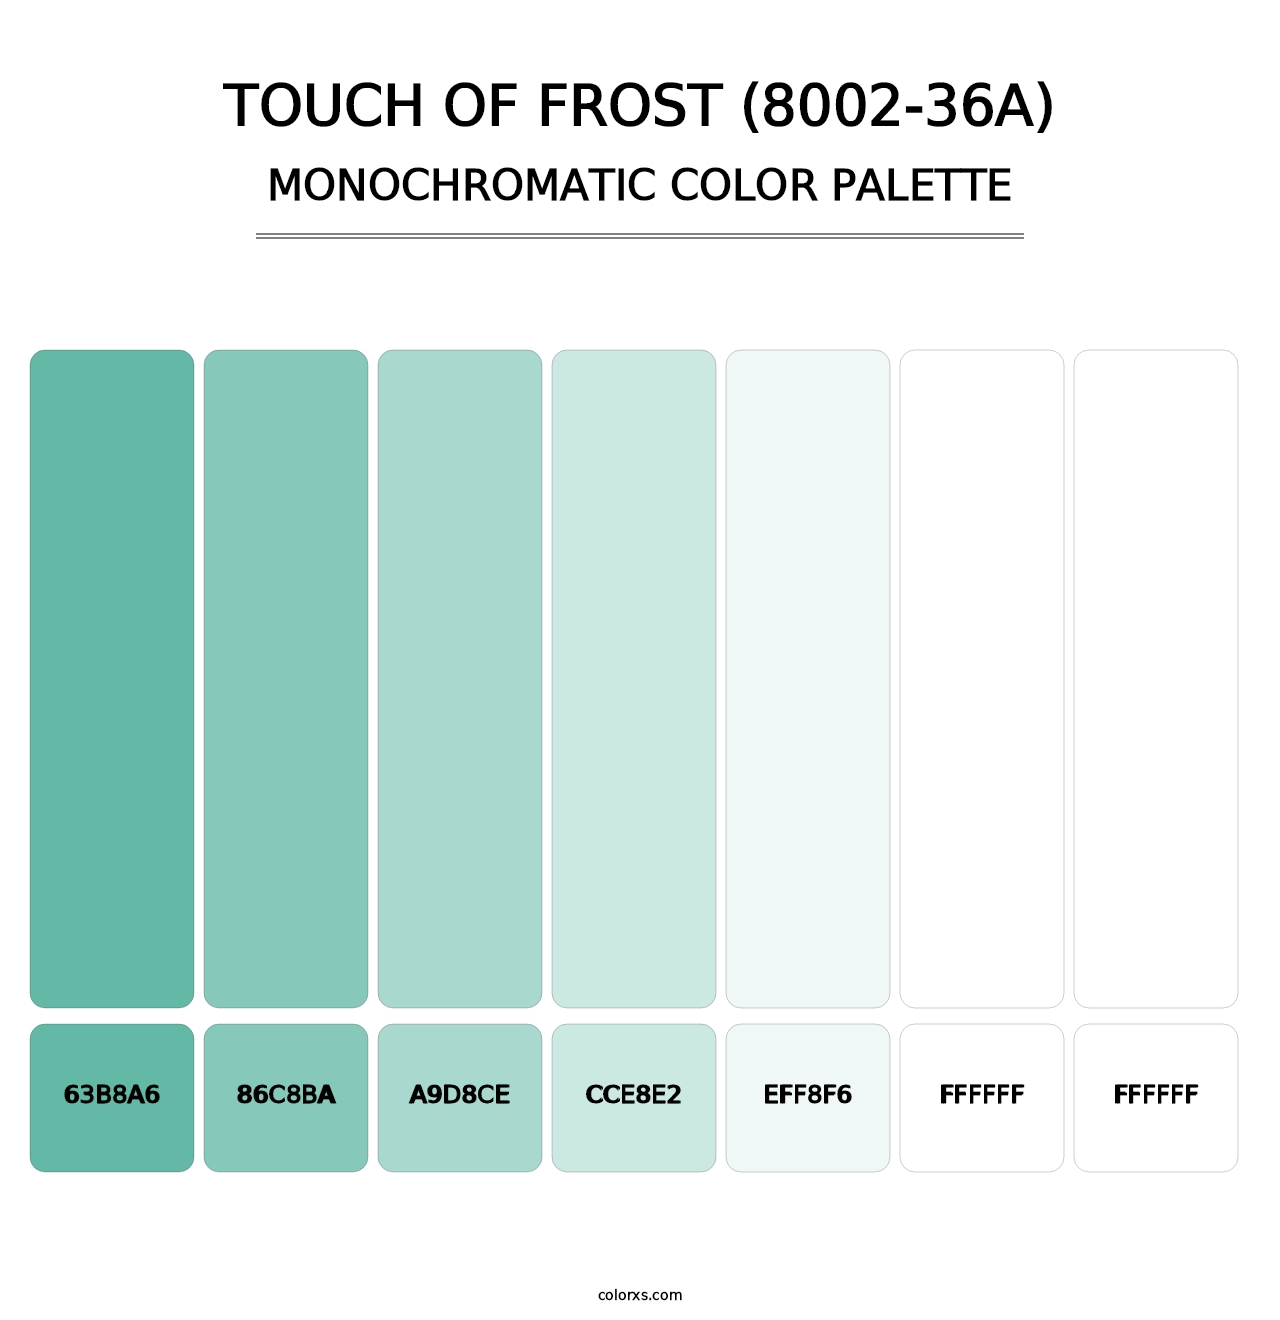 Touch of Frost (8002-36A) - Monochromatic Color Palette